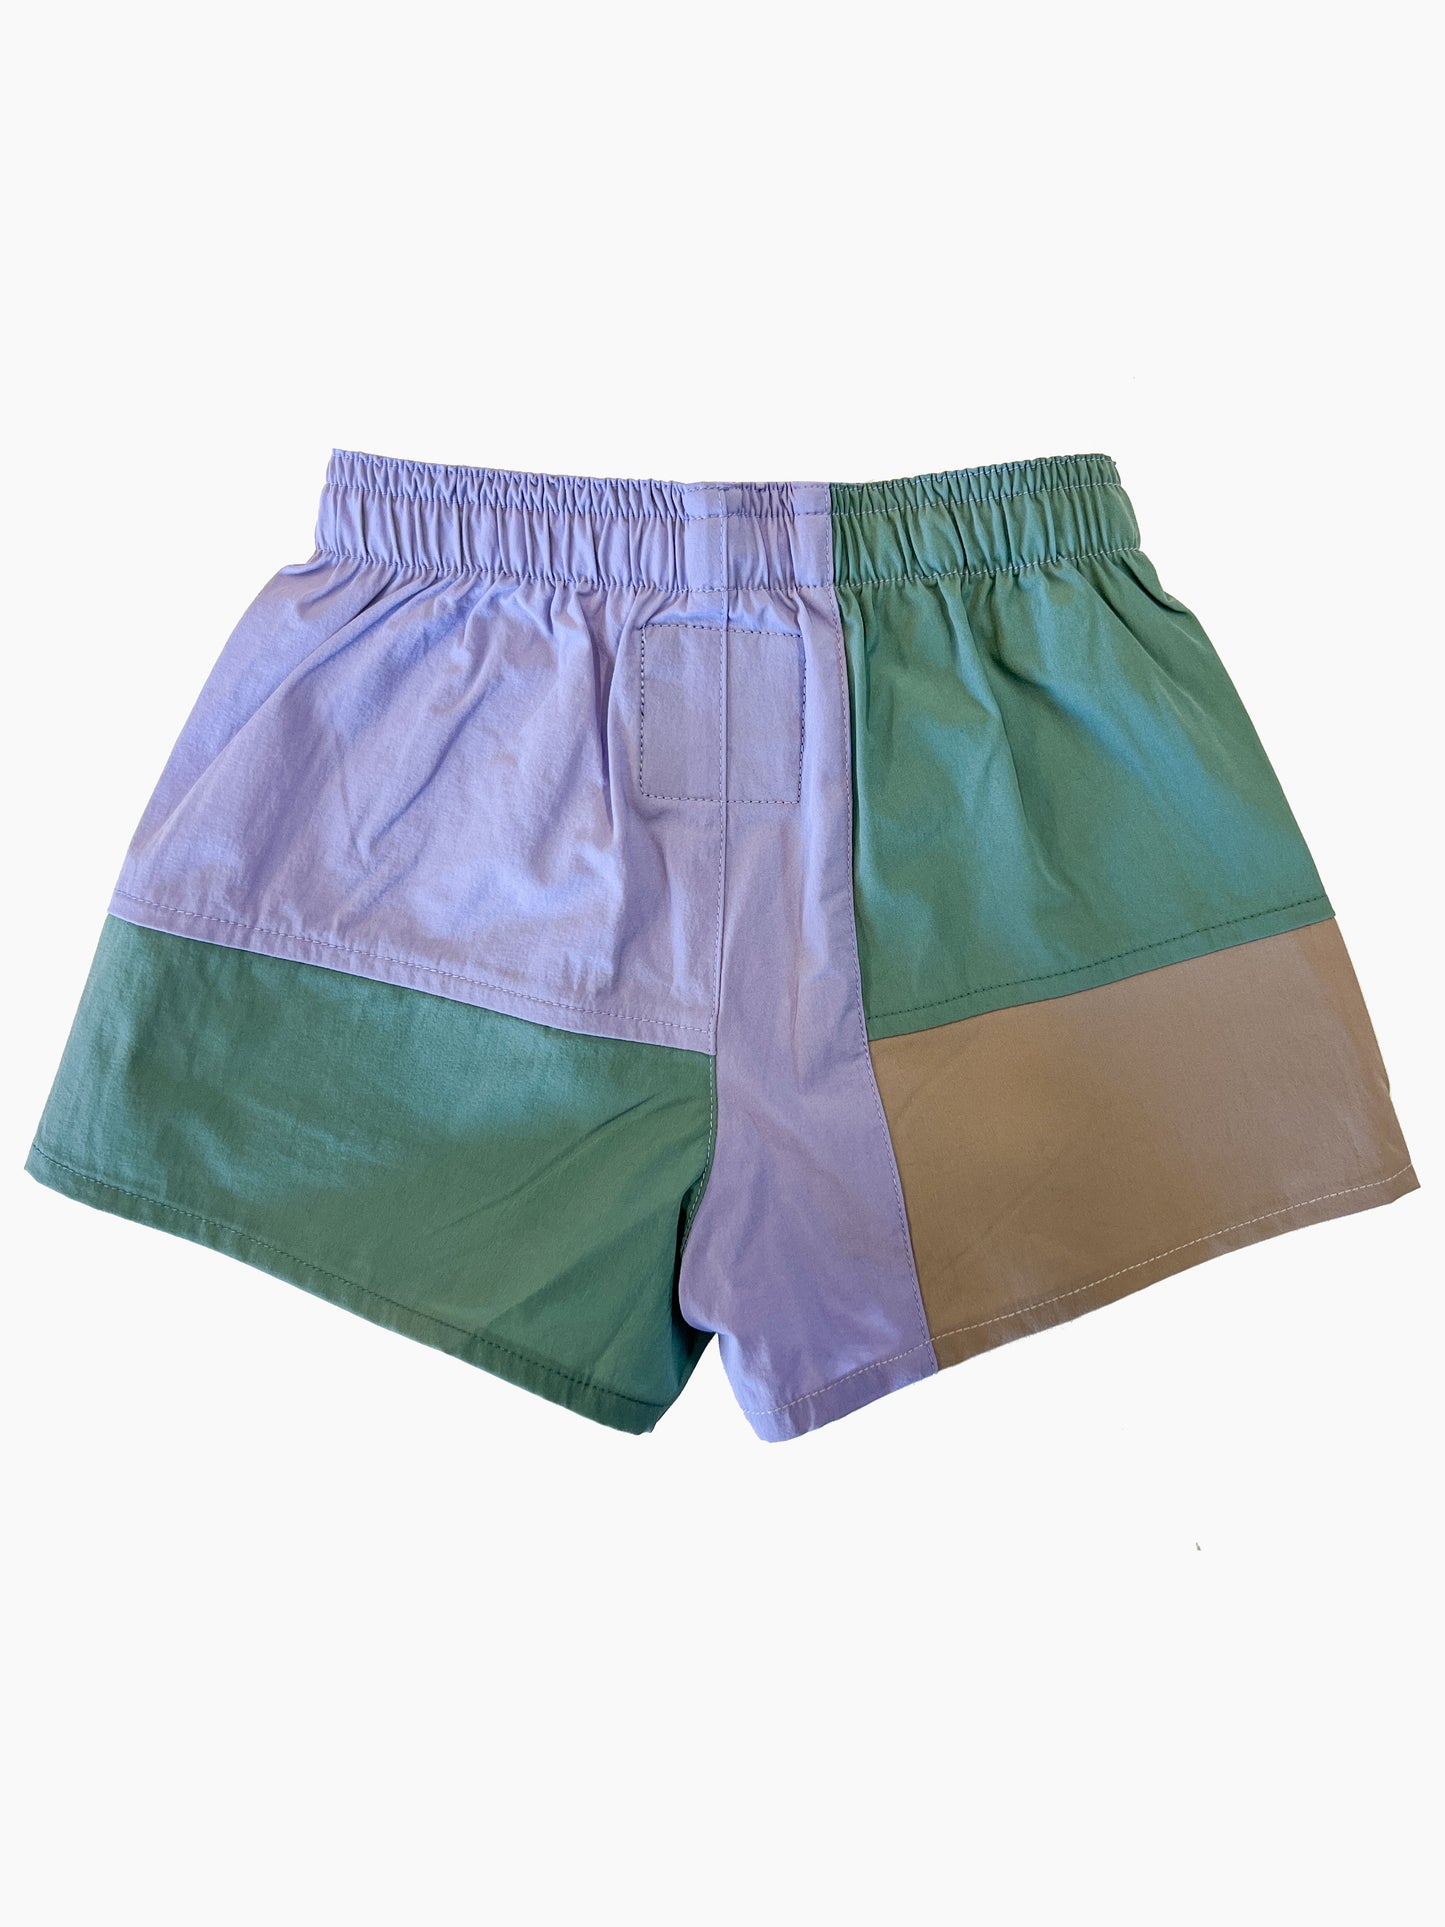 Expedition Shorts